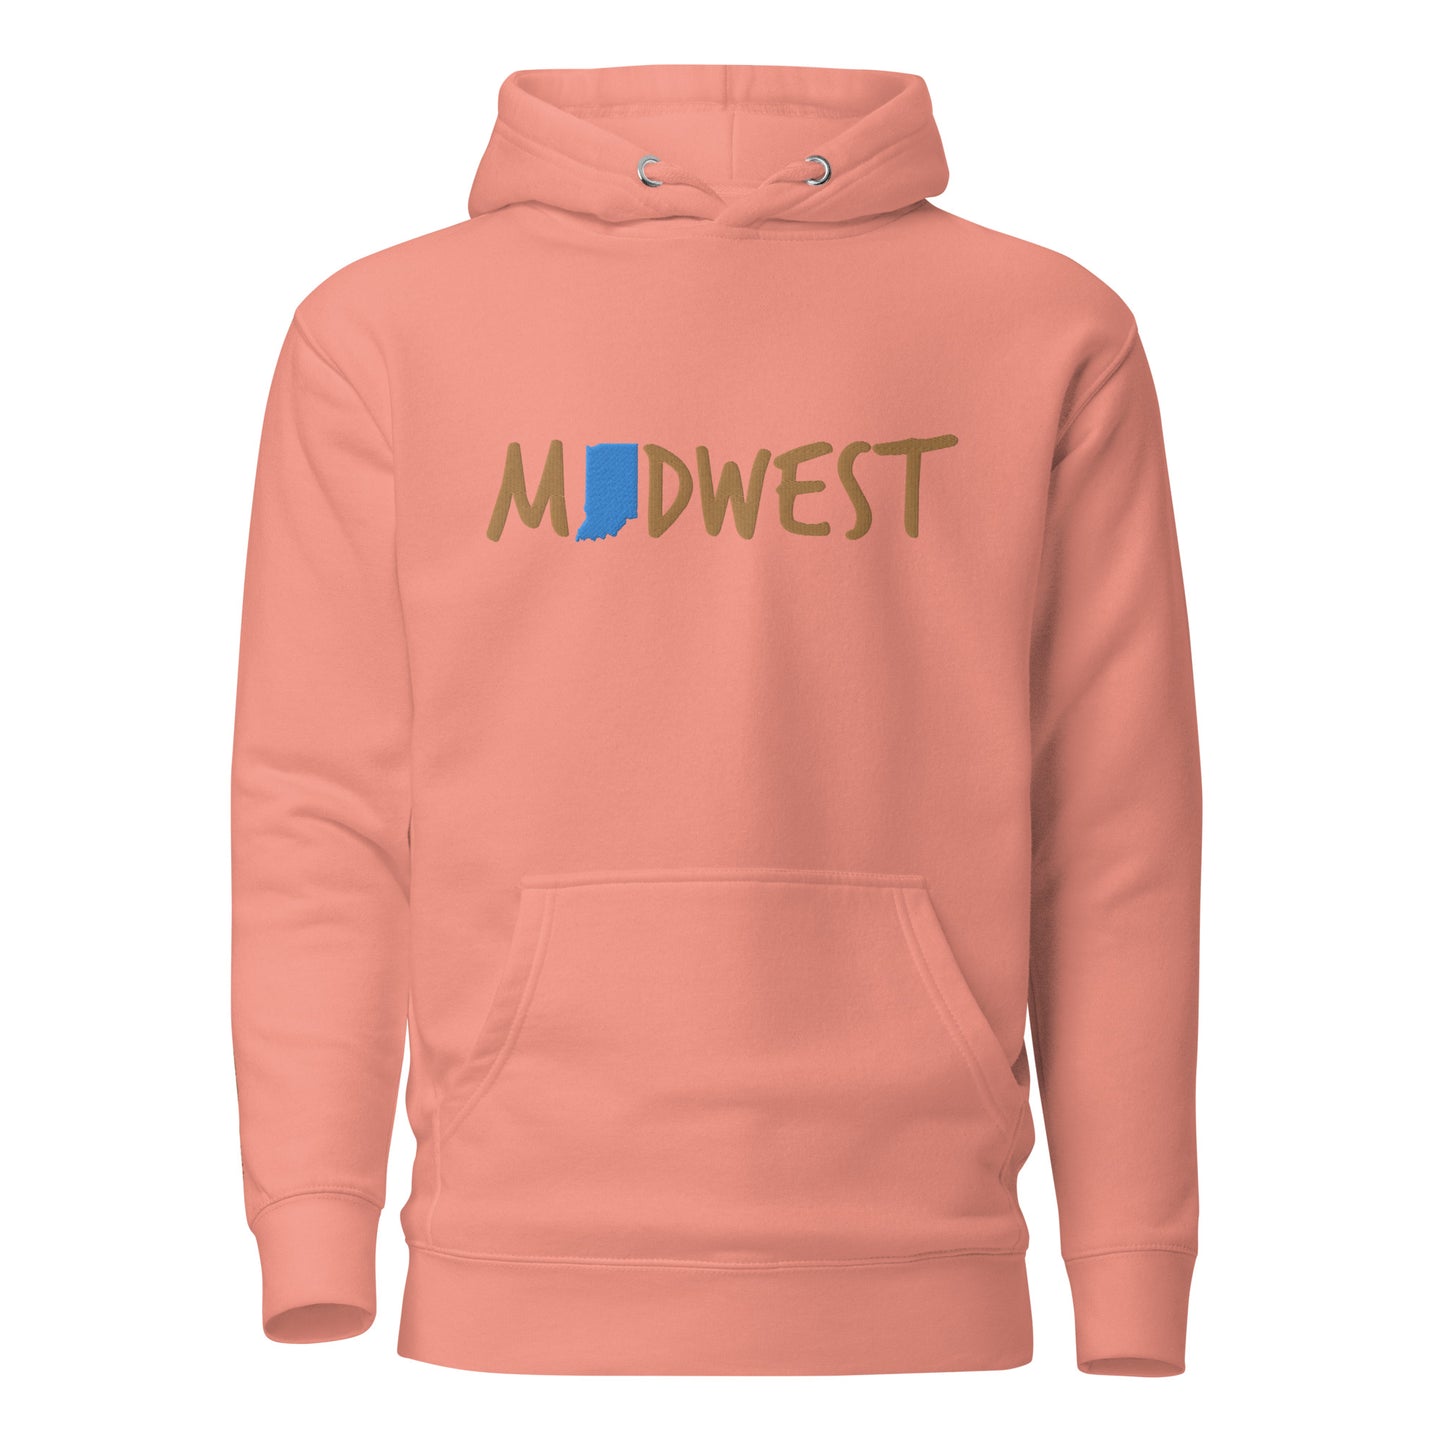 Indiana Midwest 'Love This' Embroidered Unisex Hoodie Unisex Hoodie